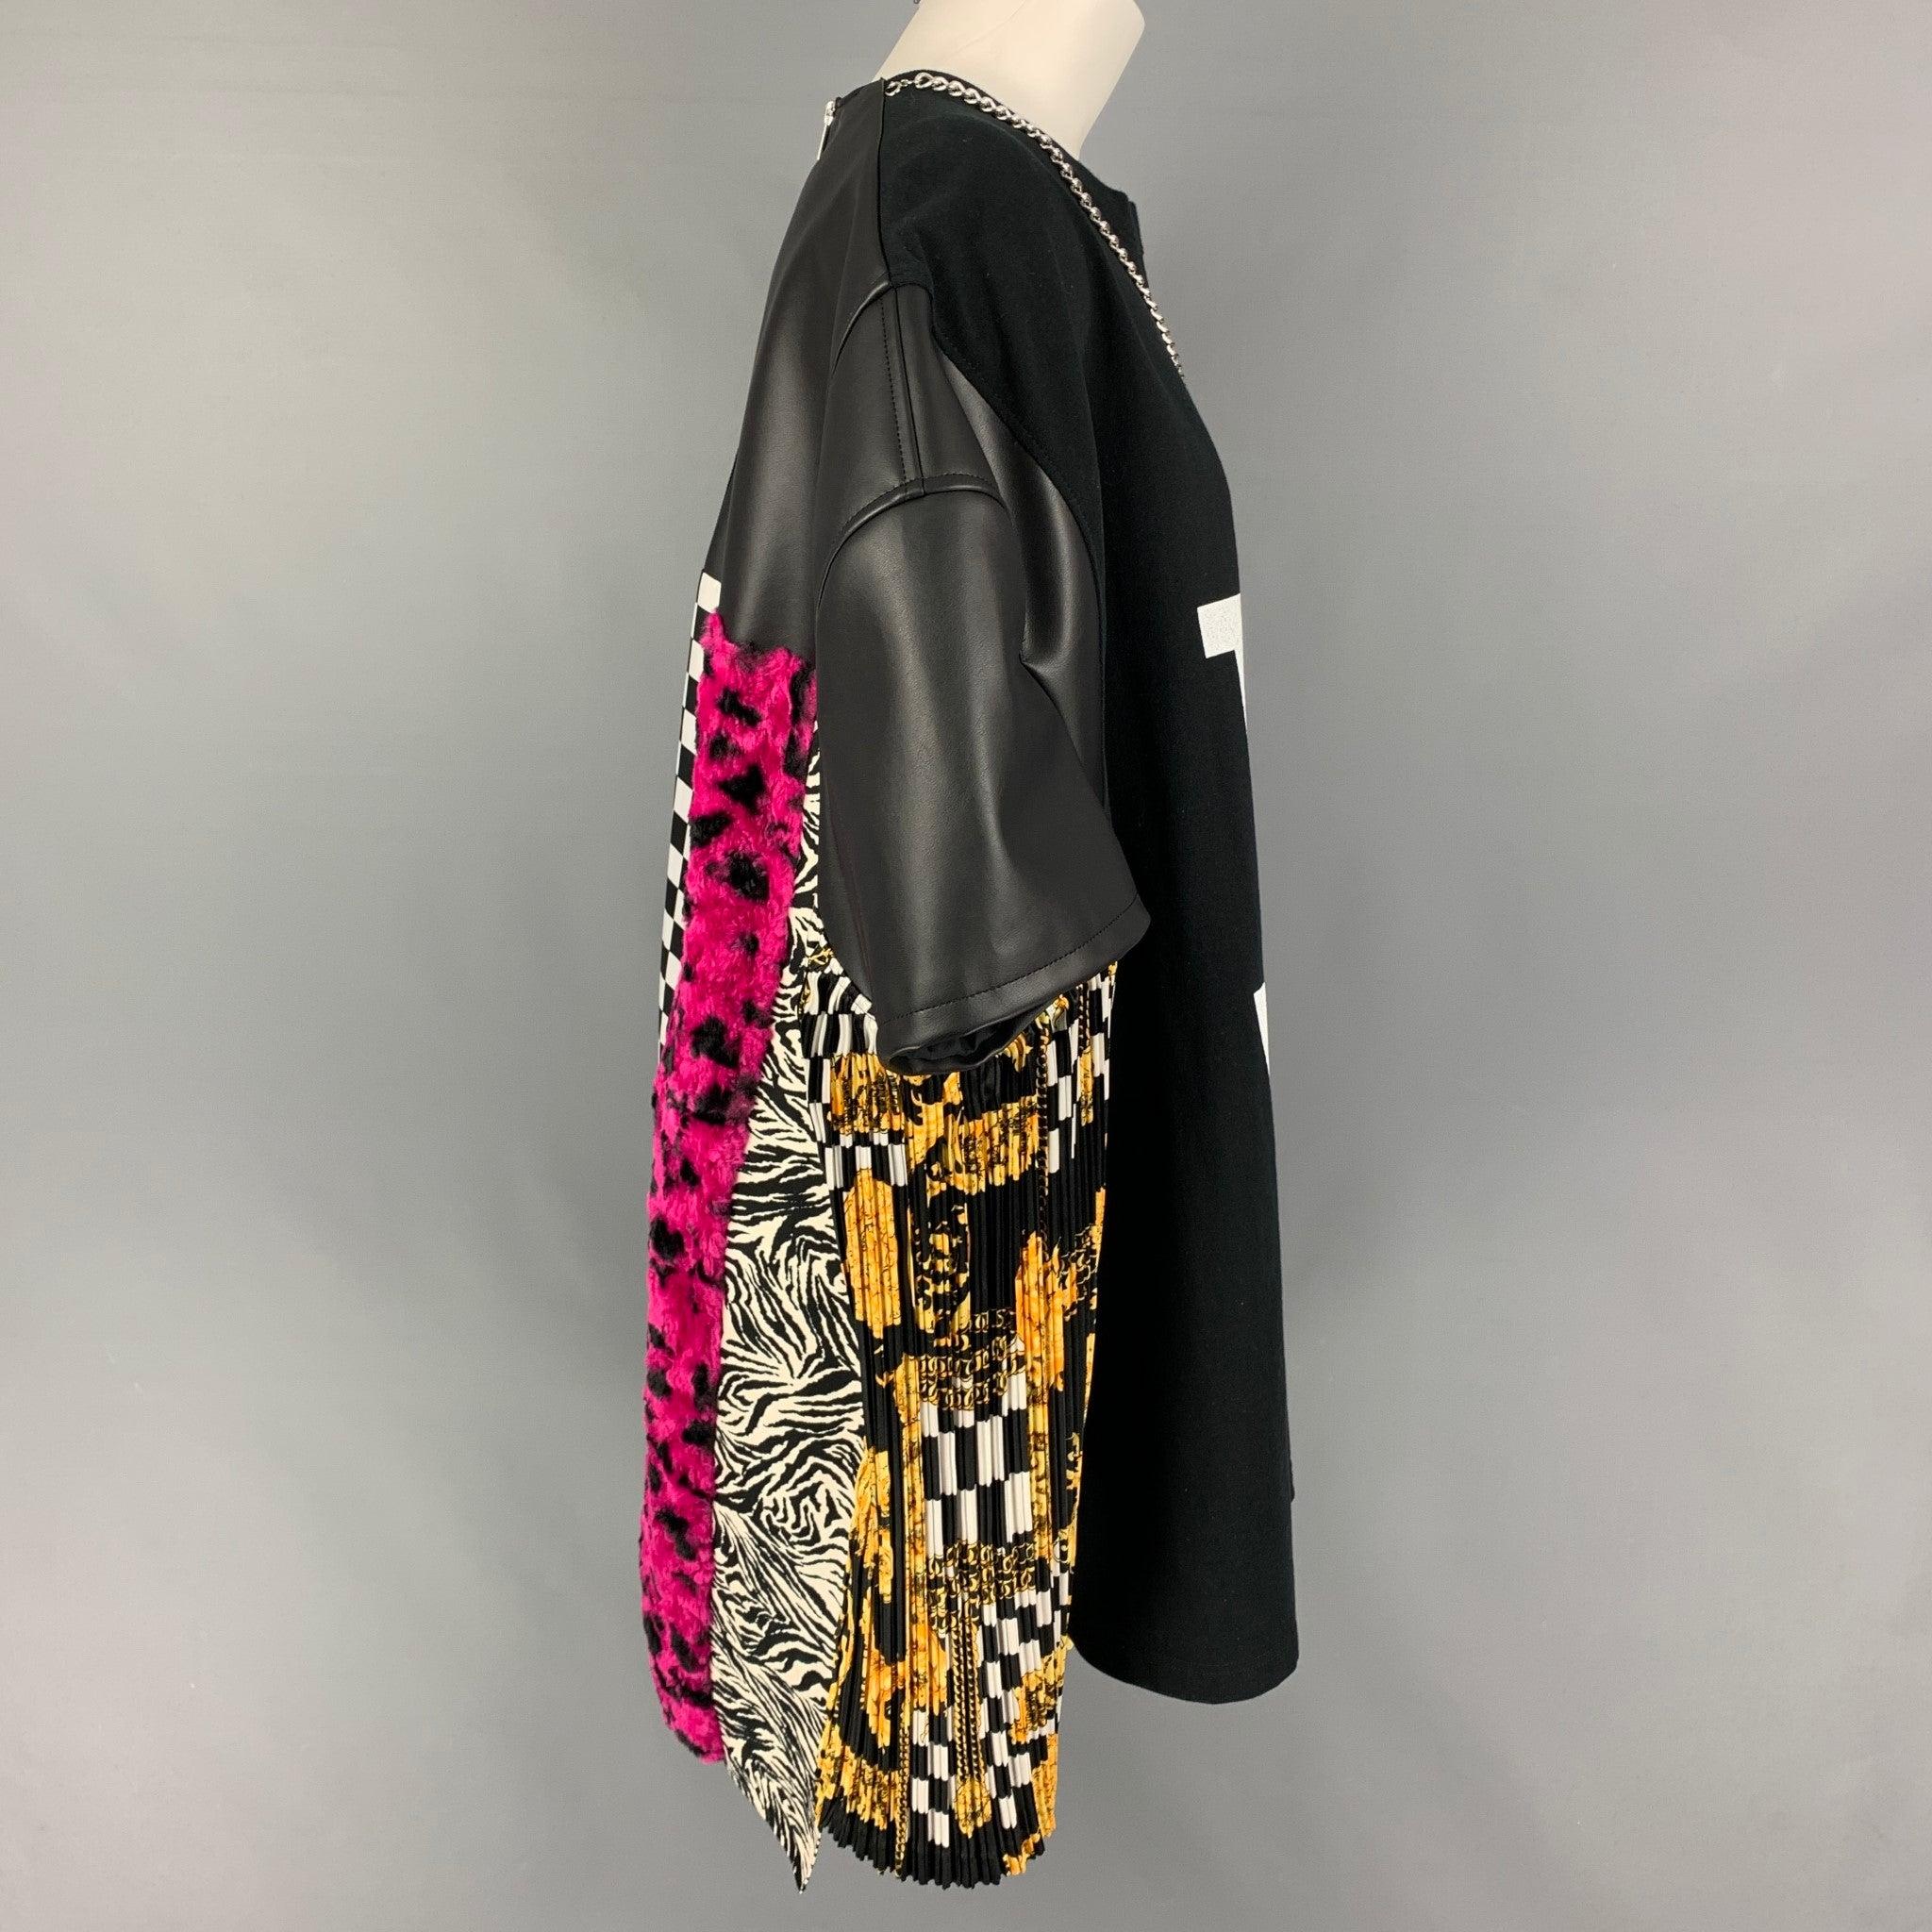 JUNYA WATANABE t-shirt comes in a black & multi-color mixed fabrics featuring a oversized fit, detachable chain, leather panels, back pleated design, mixed media design at lower back, and a back zipper closure. Made in Japan.
Excellent
Pre-Owned